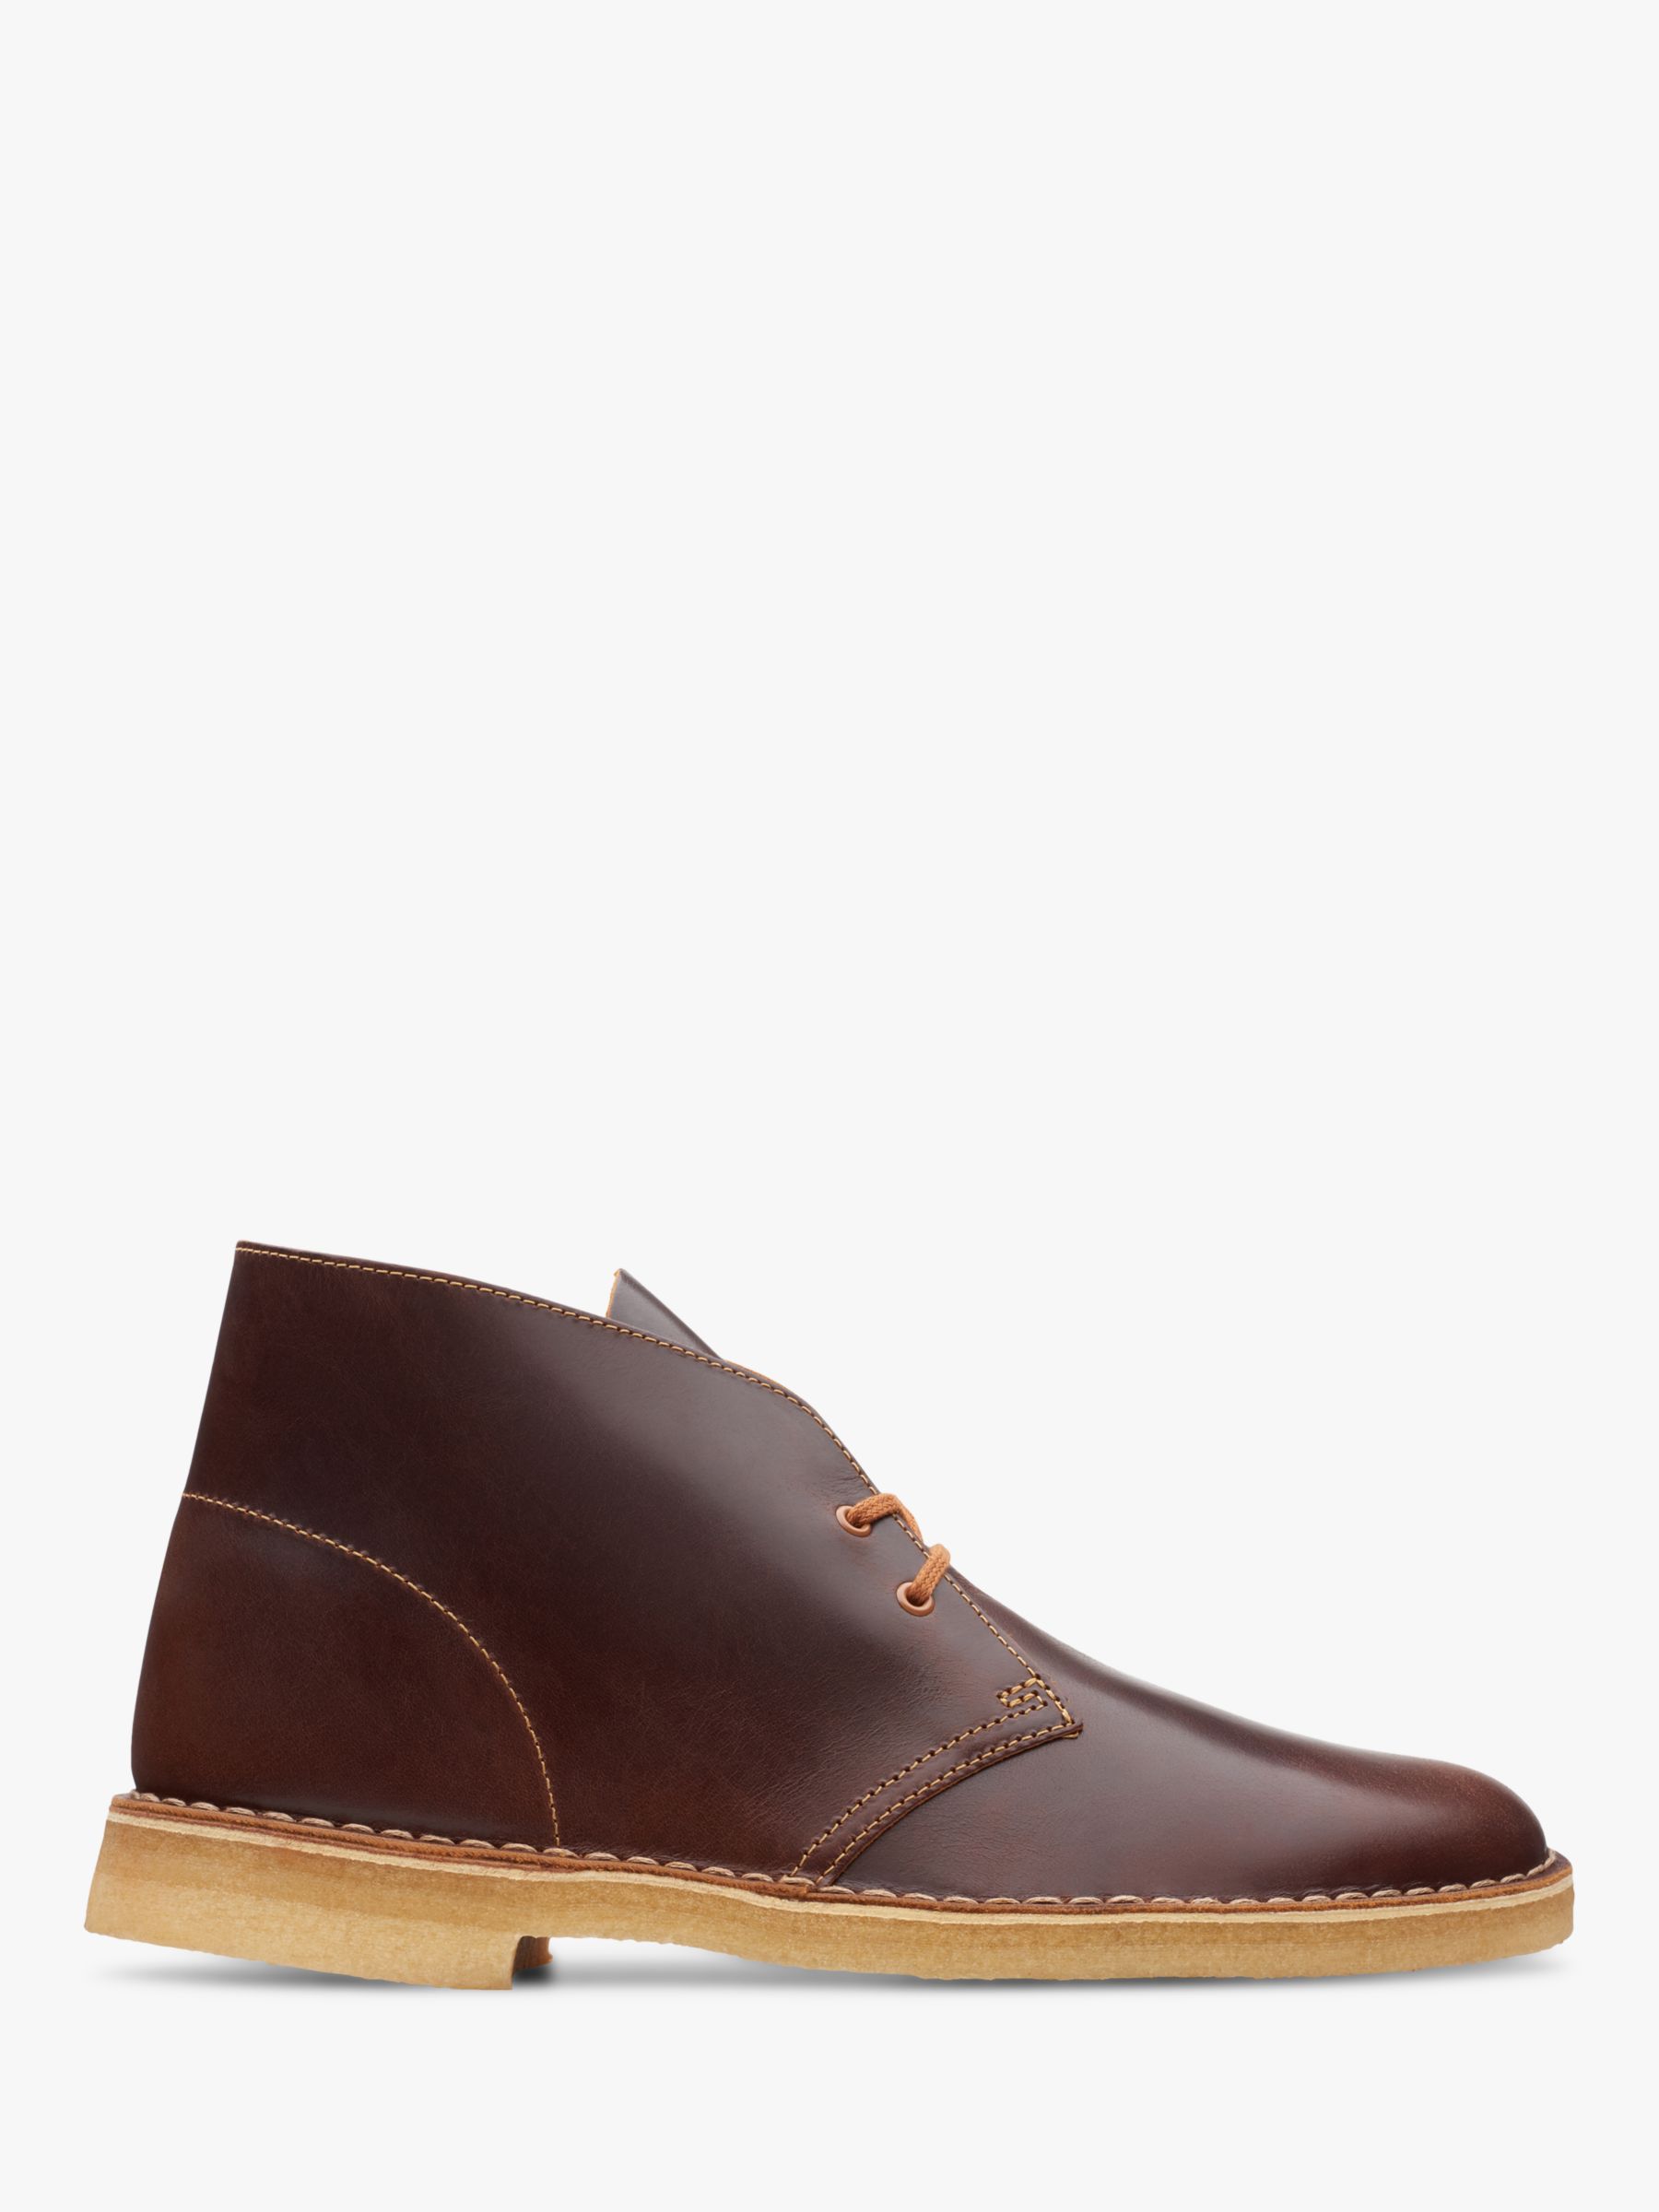 leather desert boots